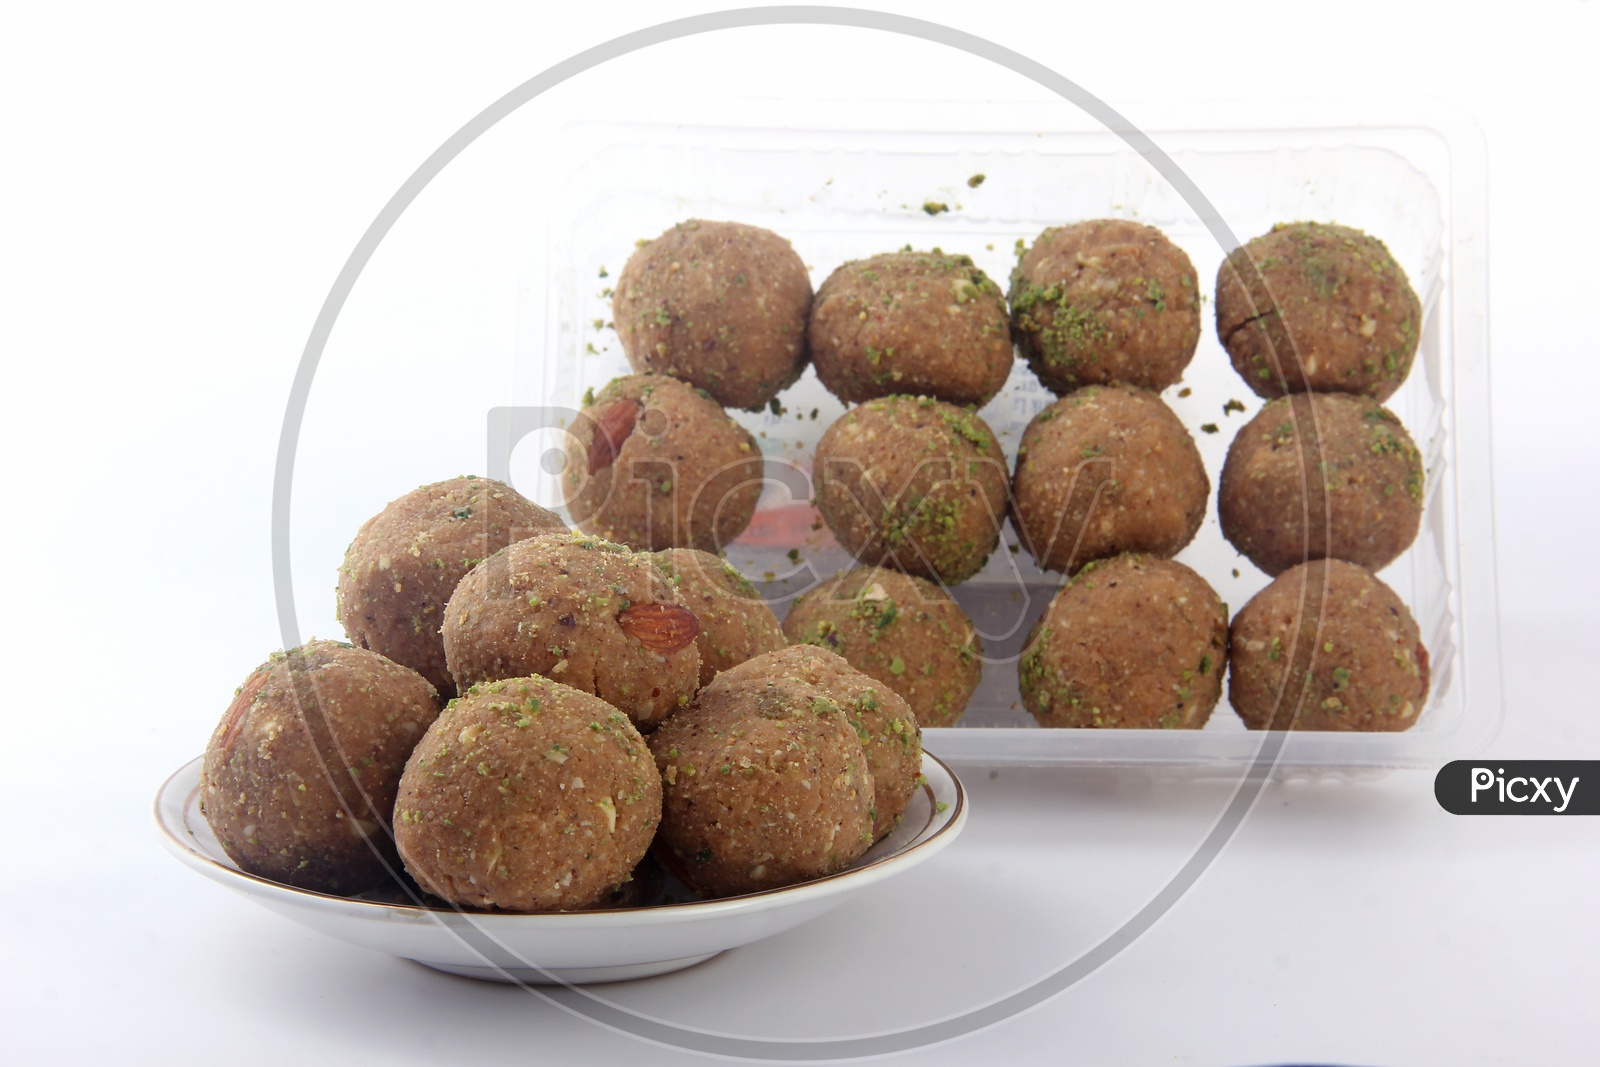 Laddu in a bowl with  White background  / Ladoo